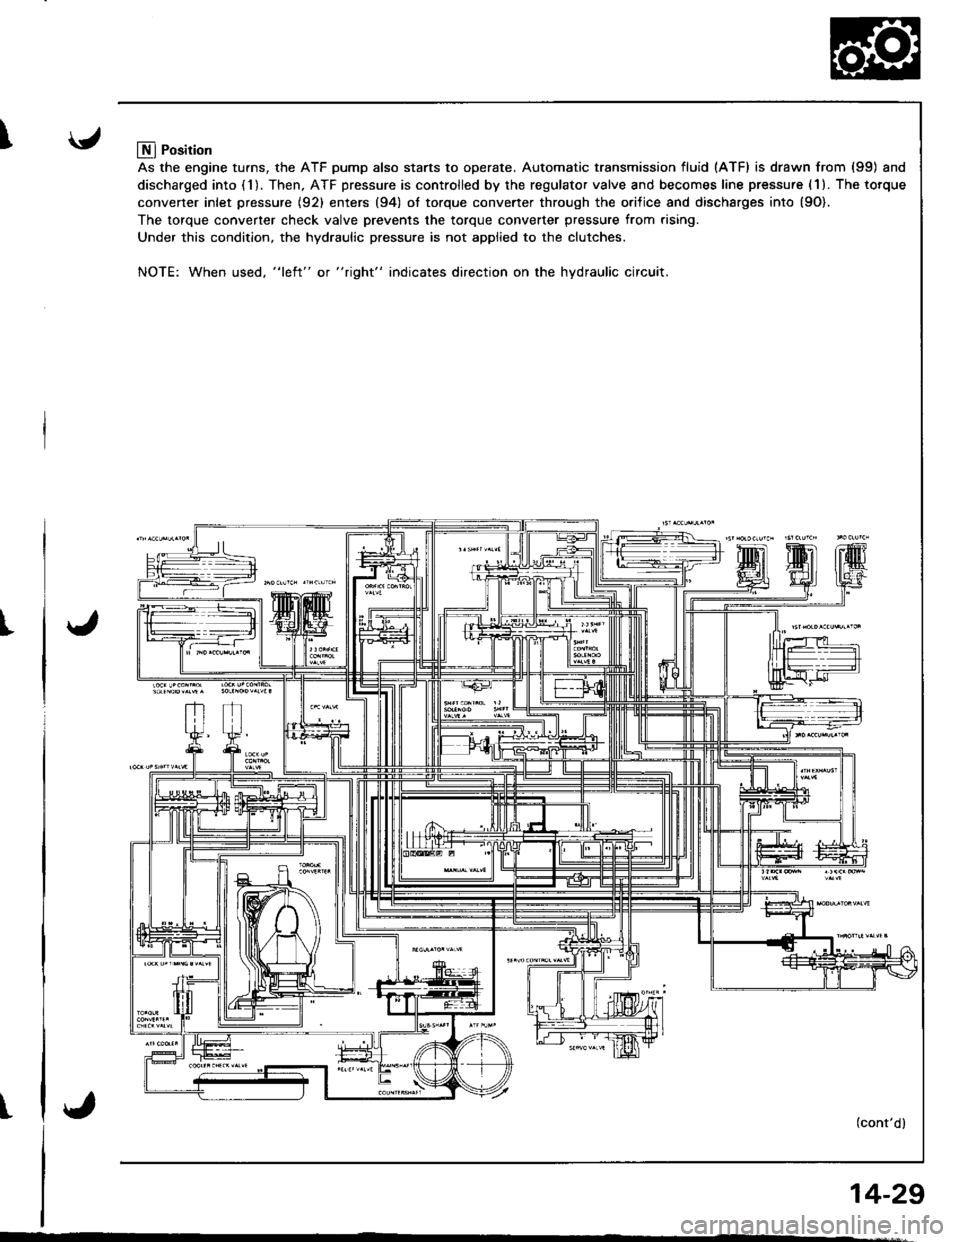 HONDA INTEGRA 1998 4.G Workshop Manual I
I
I
Llfl Position
As the engine turns, the ATF pump also starts to operate. Automatic transmission fluid (ATF) is drawn from (99) and
discharged into (1). Then, ATF pressure is controlled by the reg